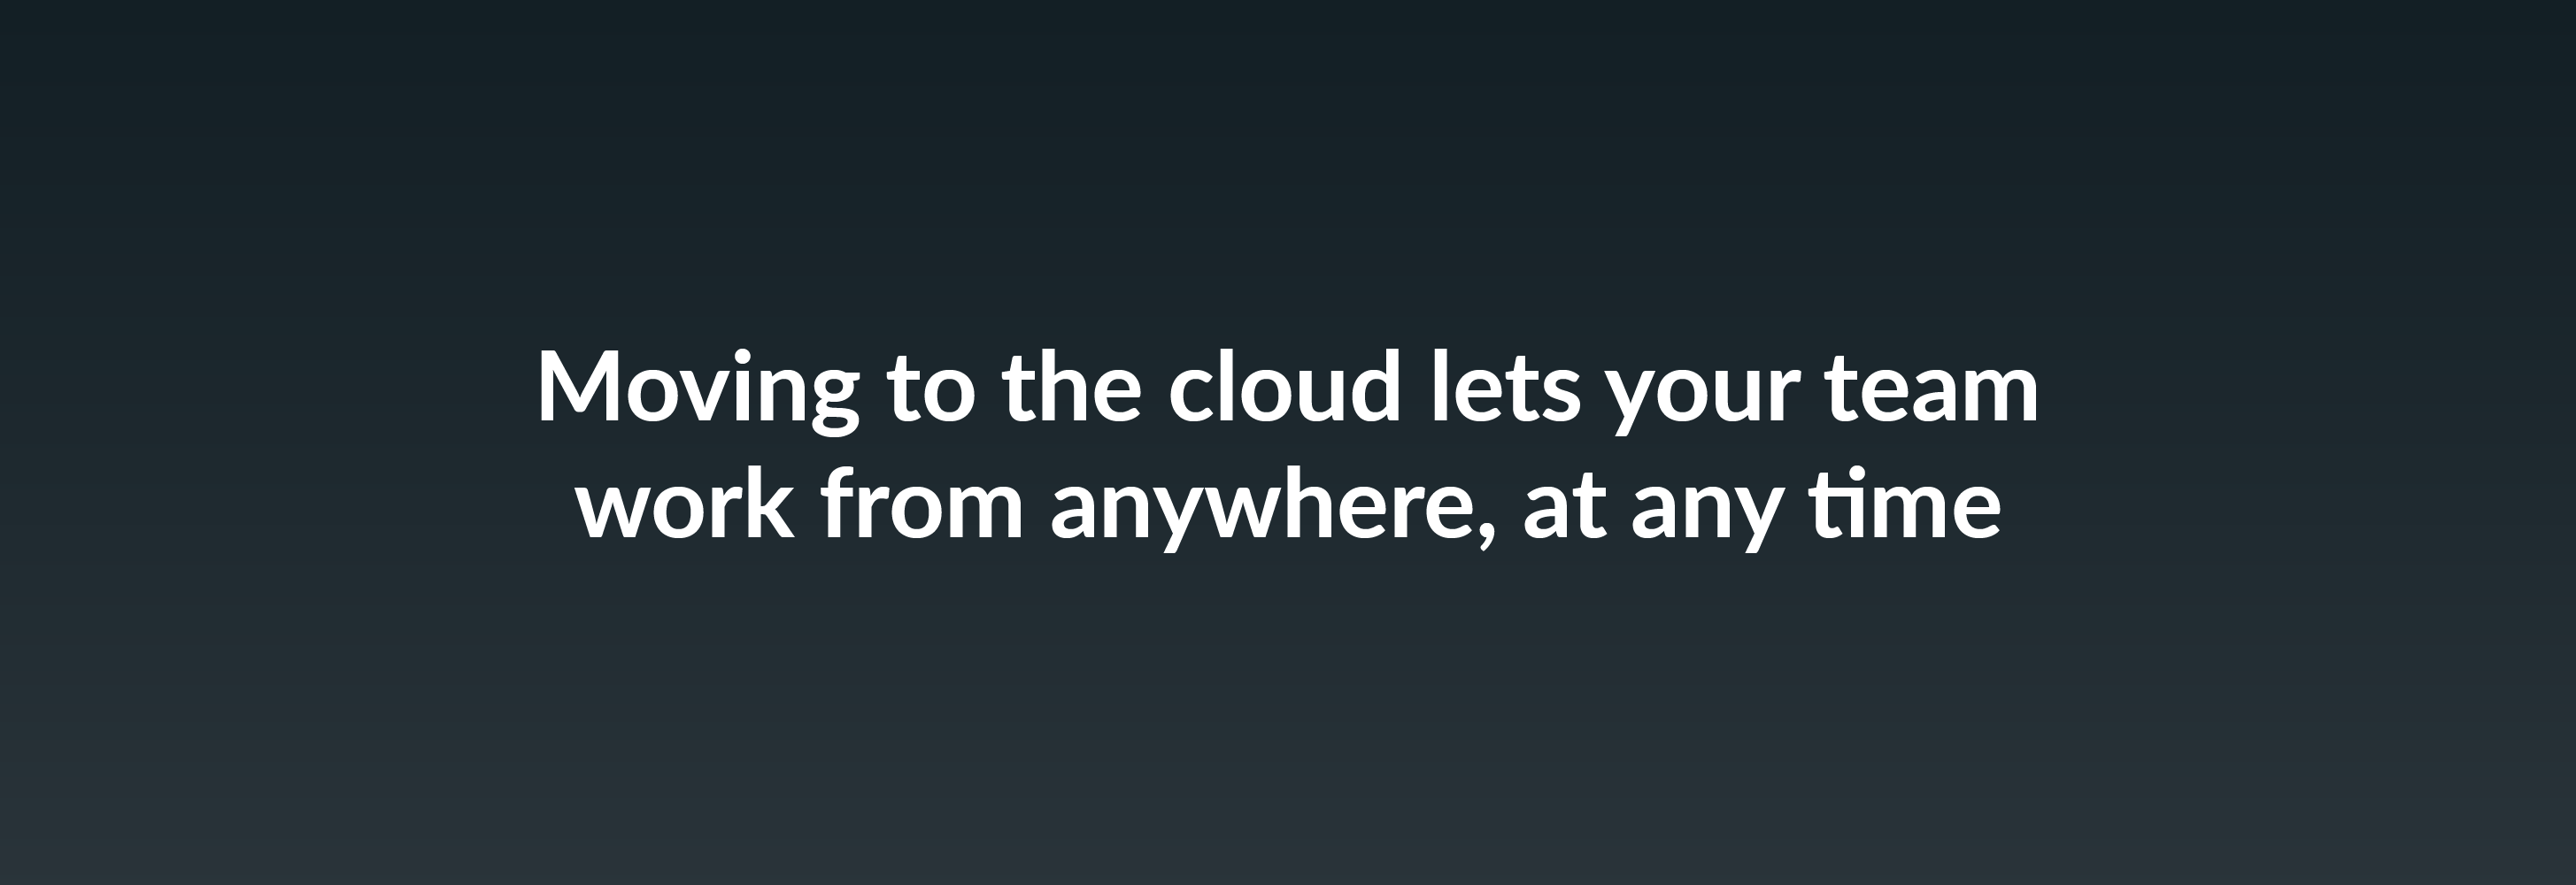 Moving to the cloud lets your team work from anywhere, at any time